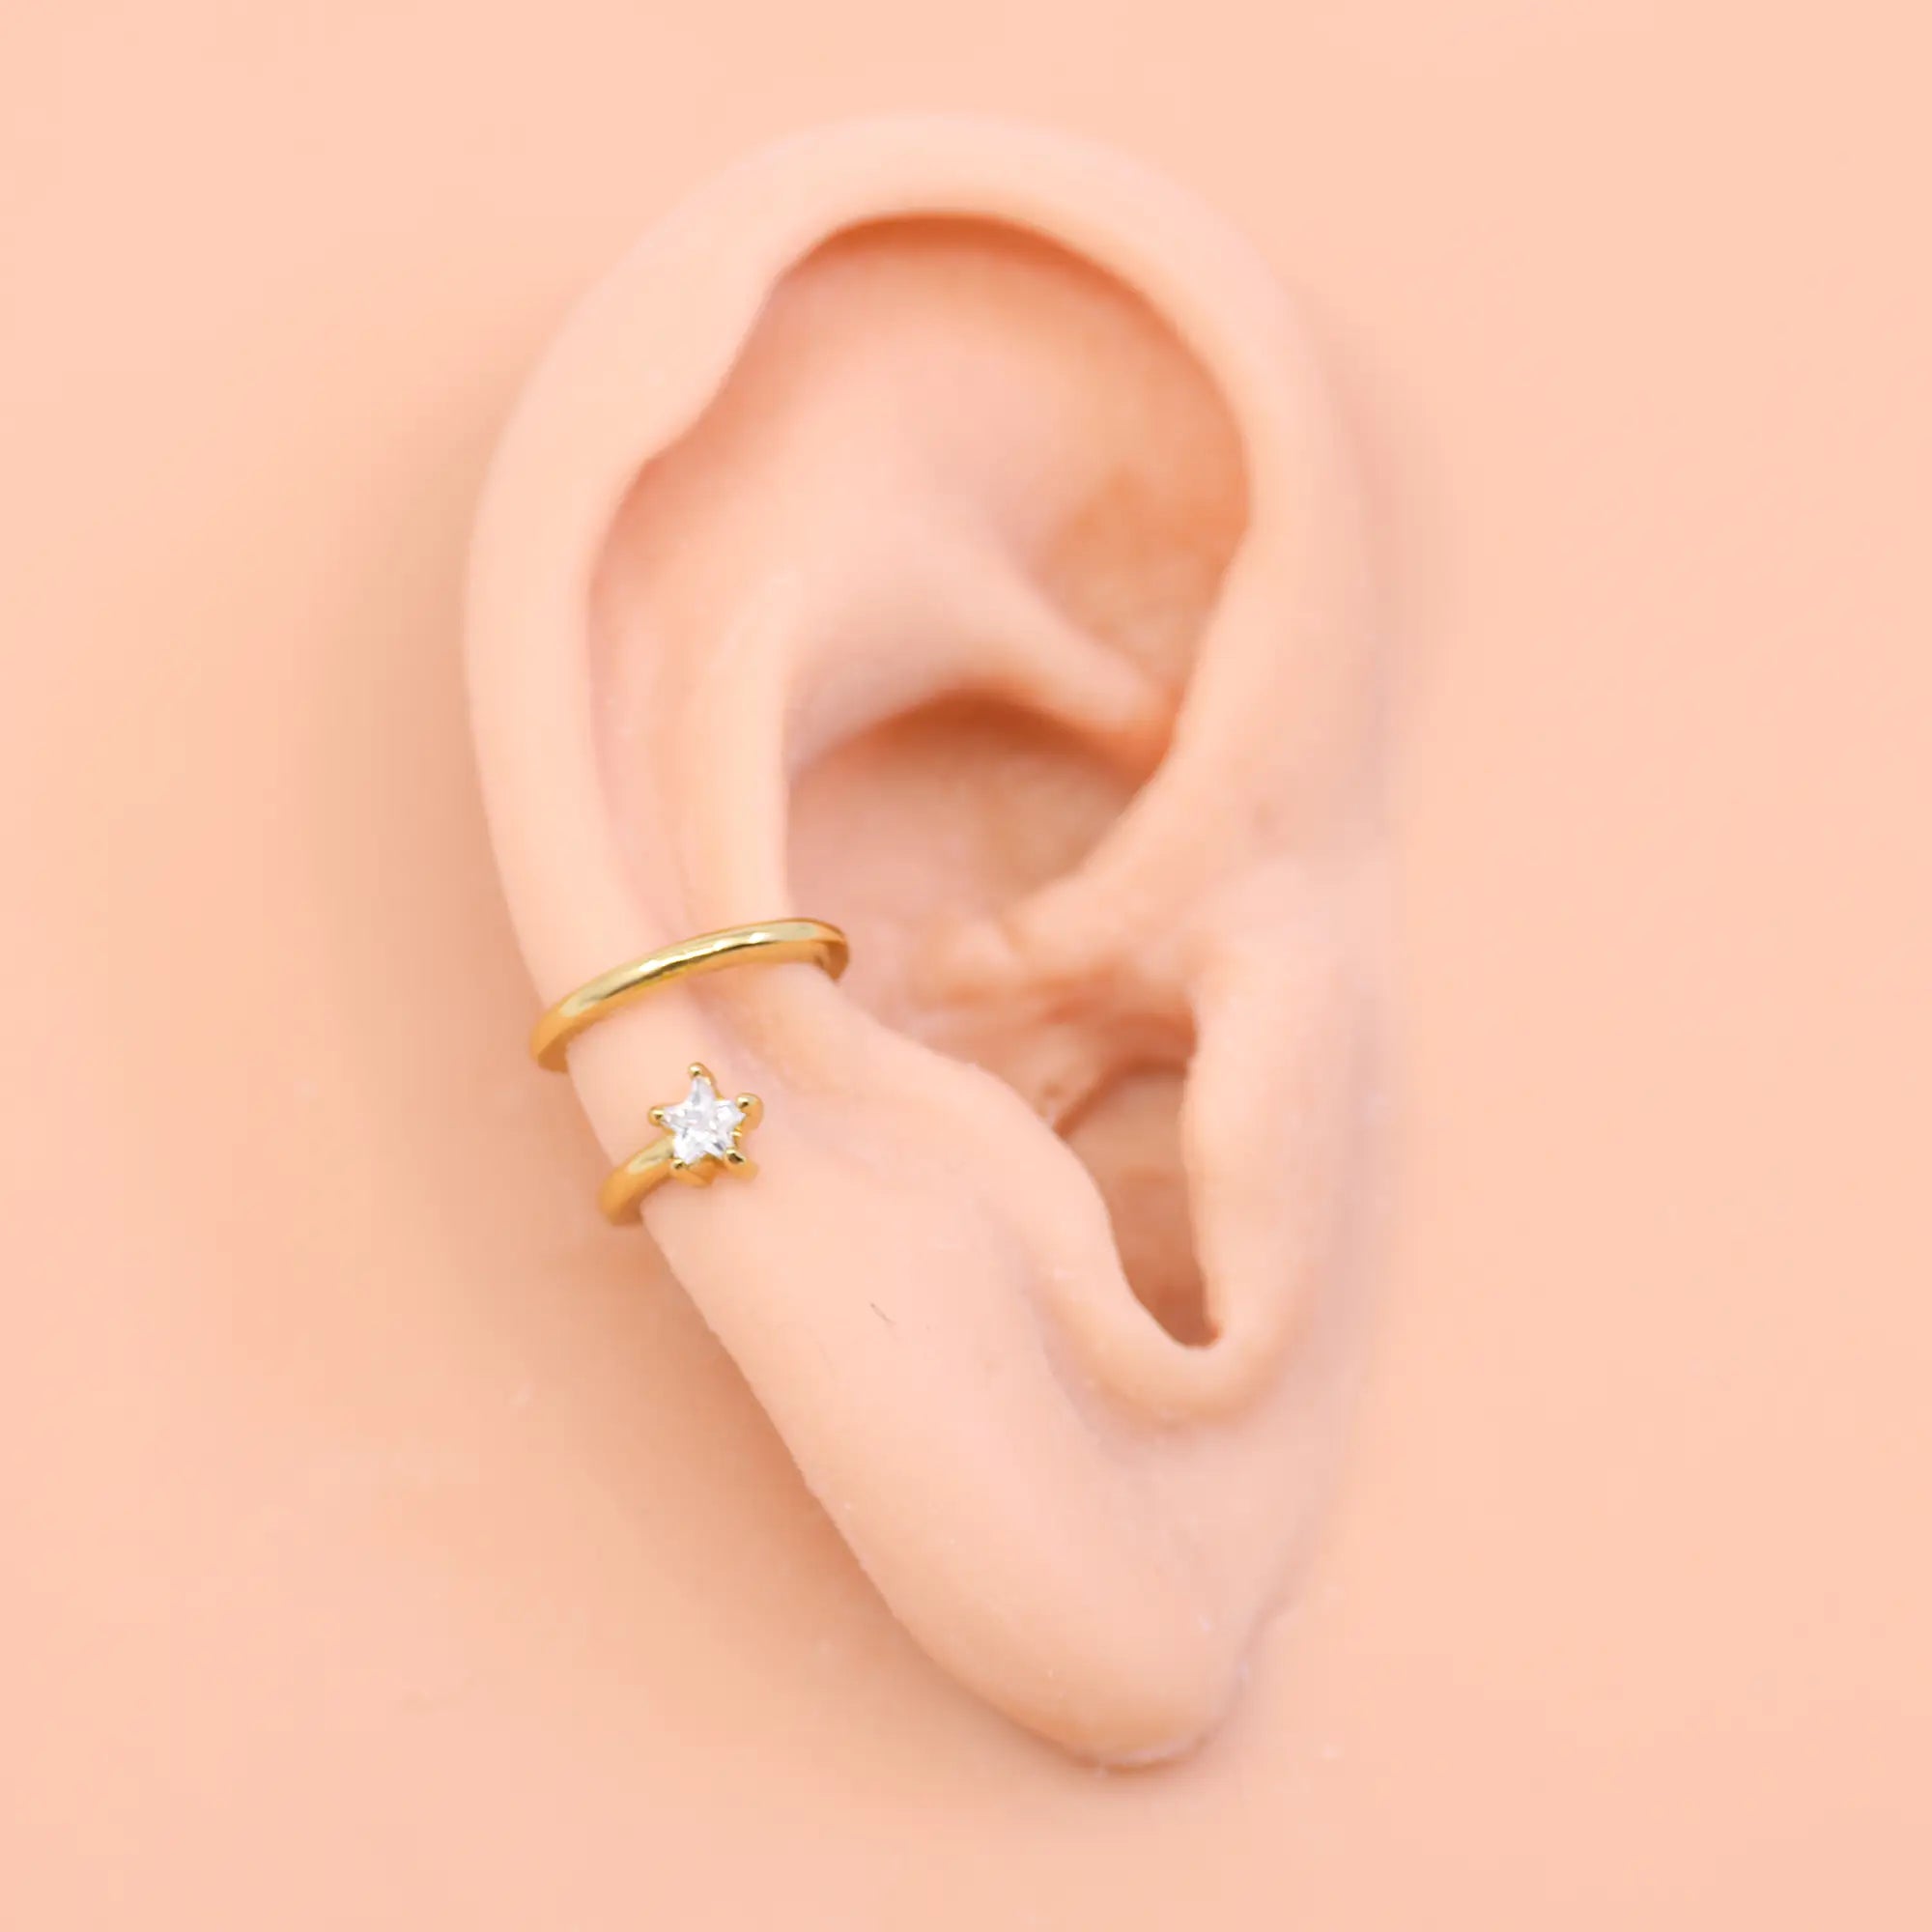 shooting star ear cuff in gold by land of salt